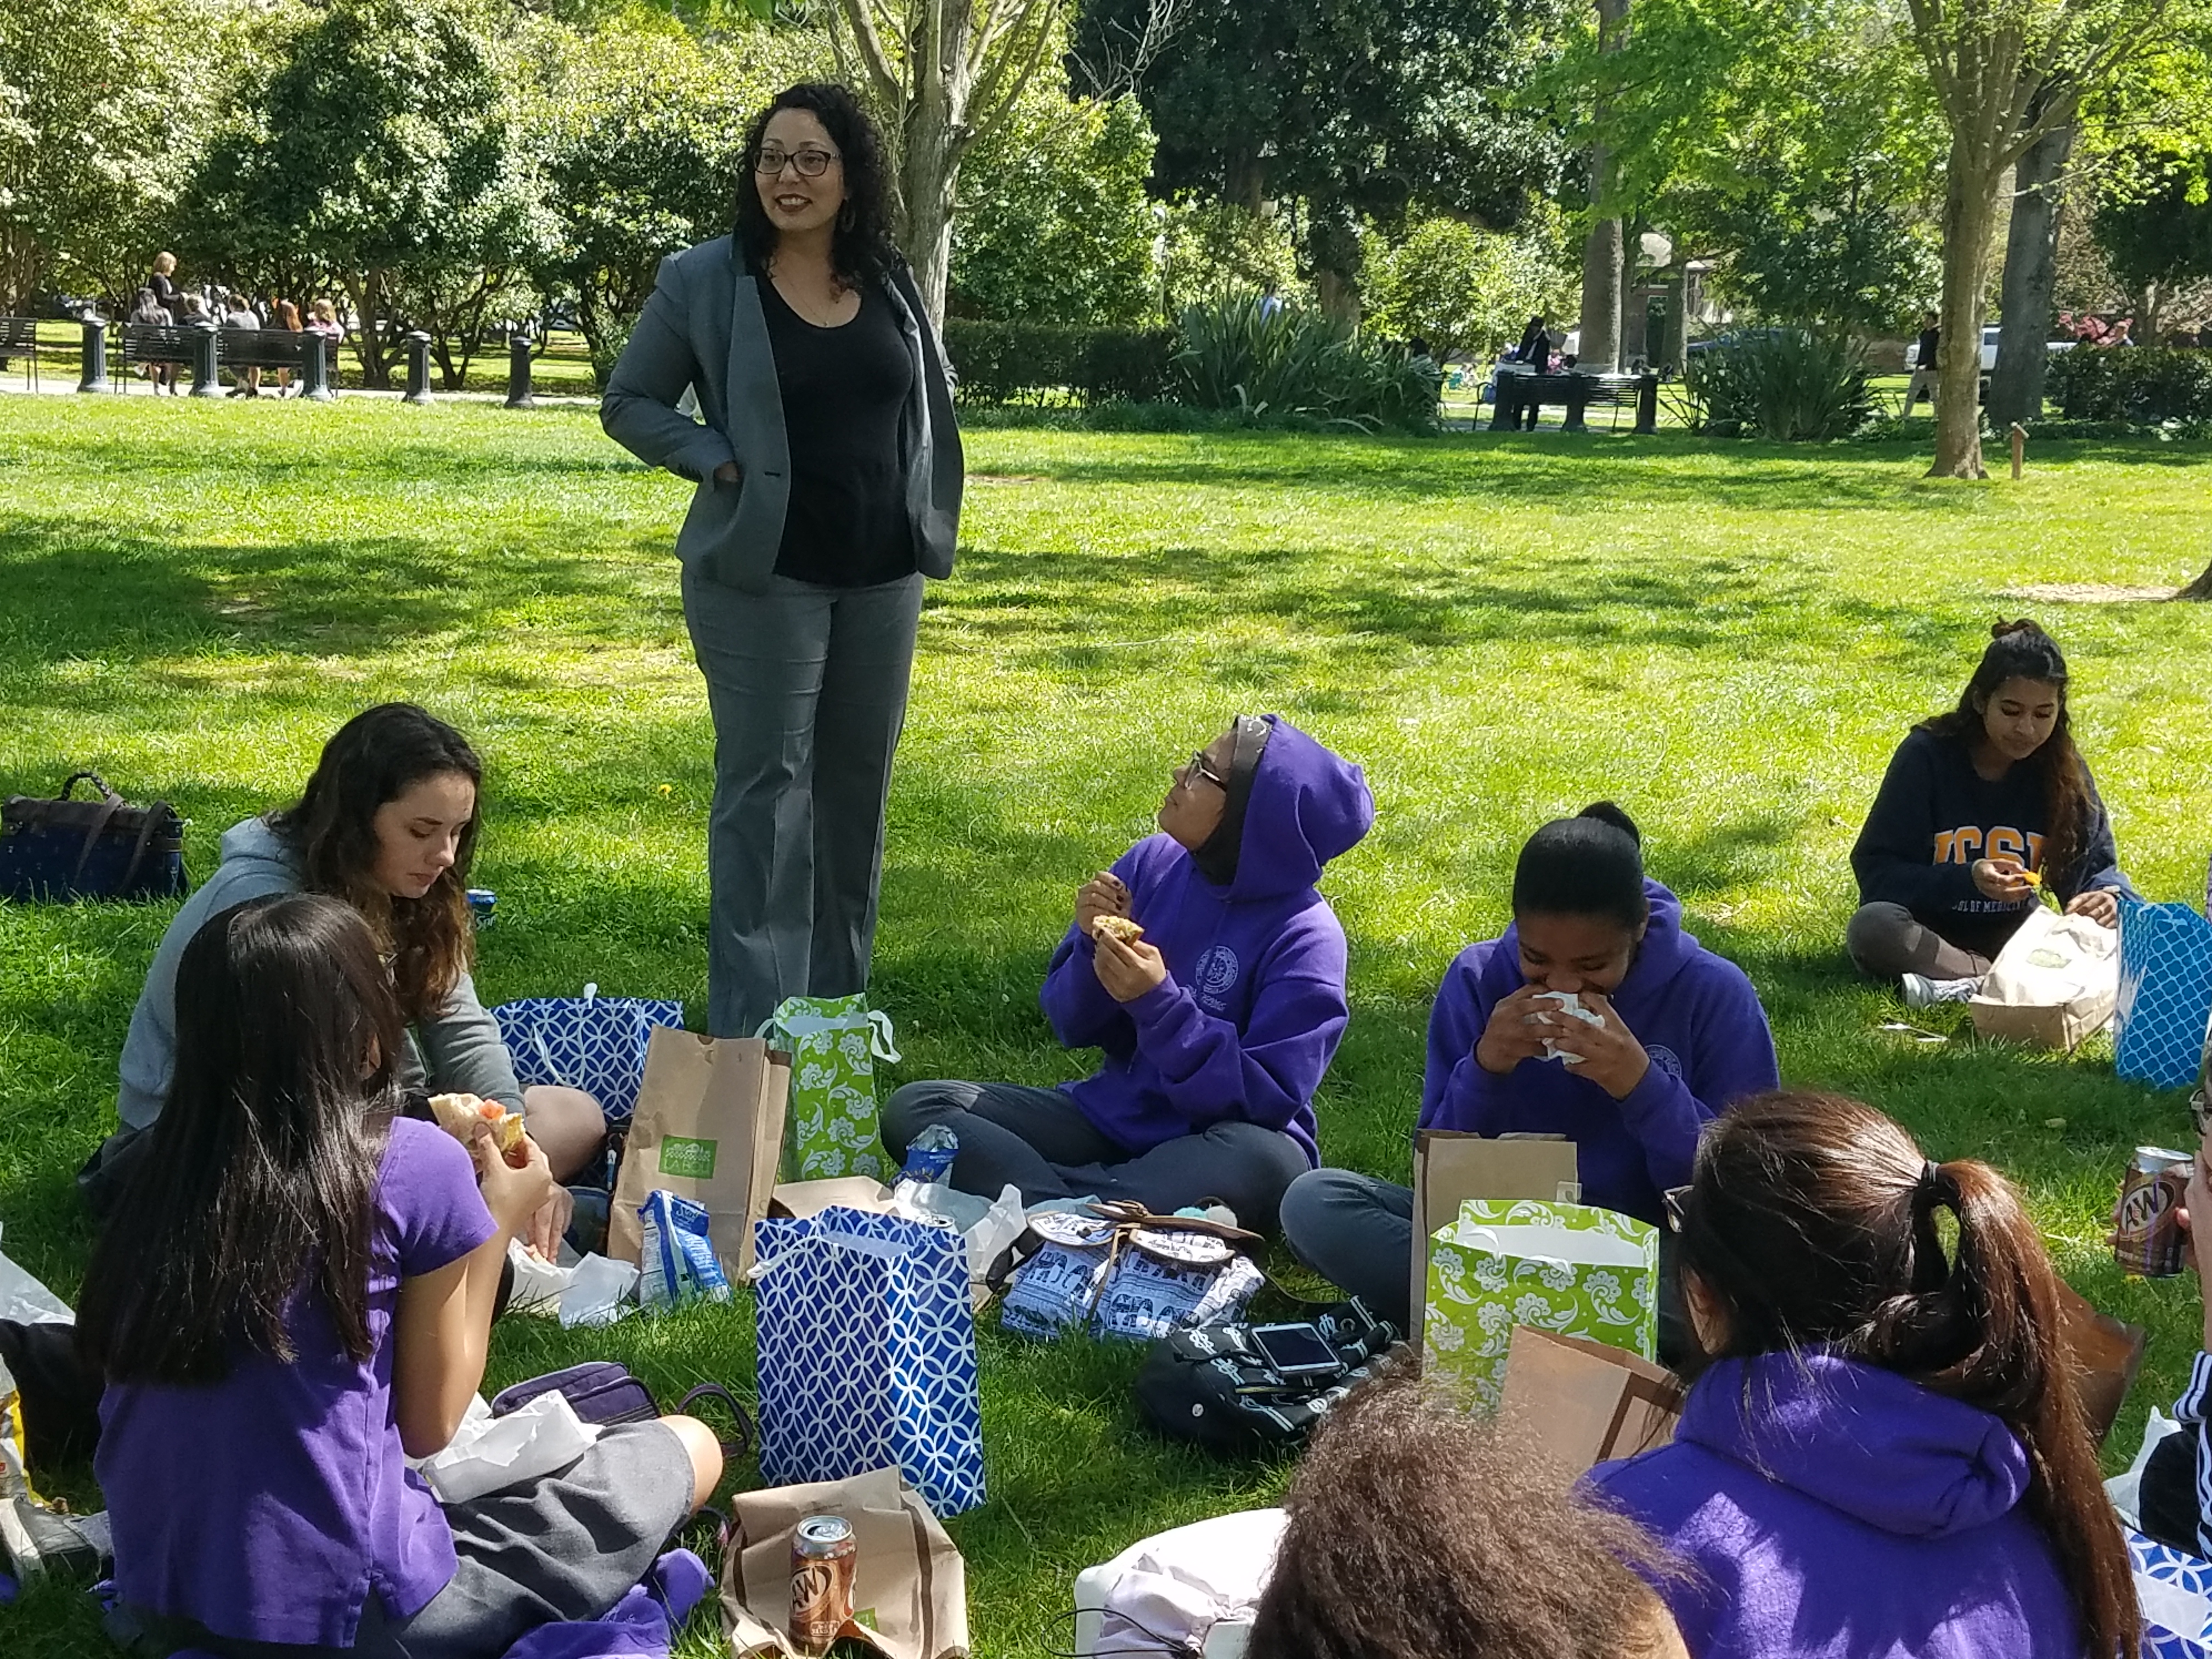 Assemblymember Cristina Garcia talking to the Girls Academic Leadership Academy during their lunch break